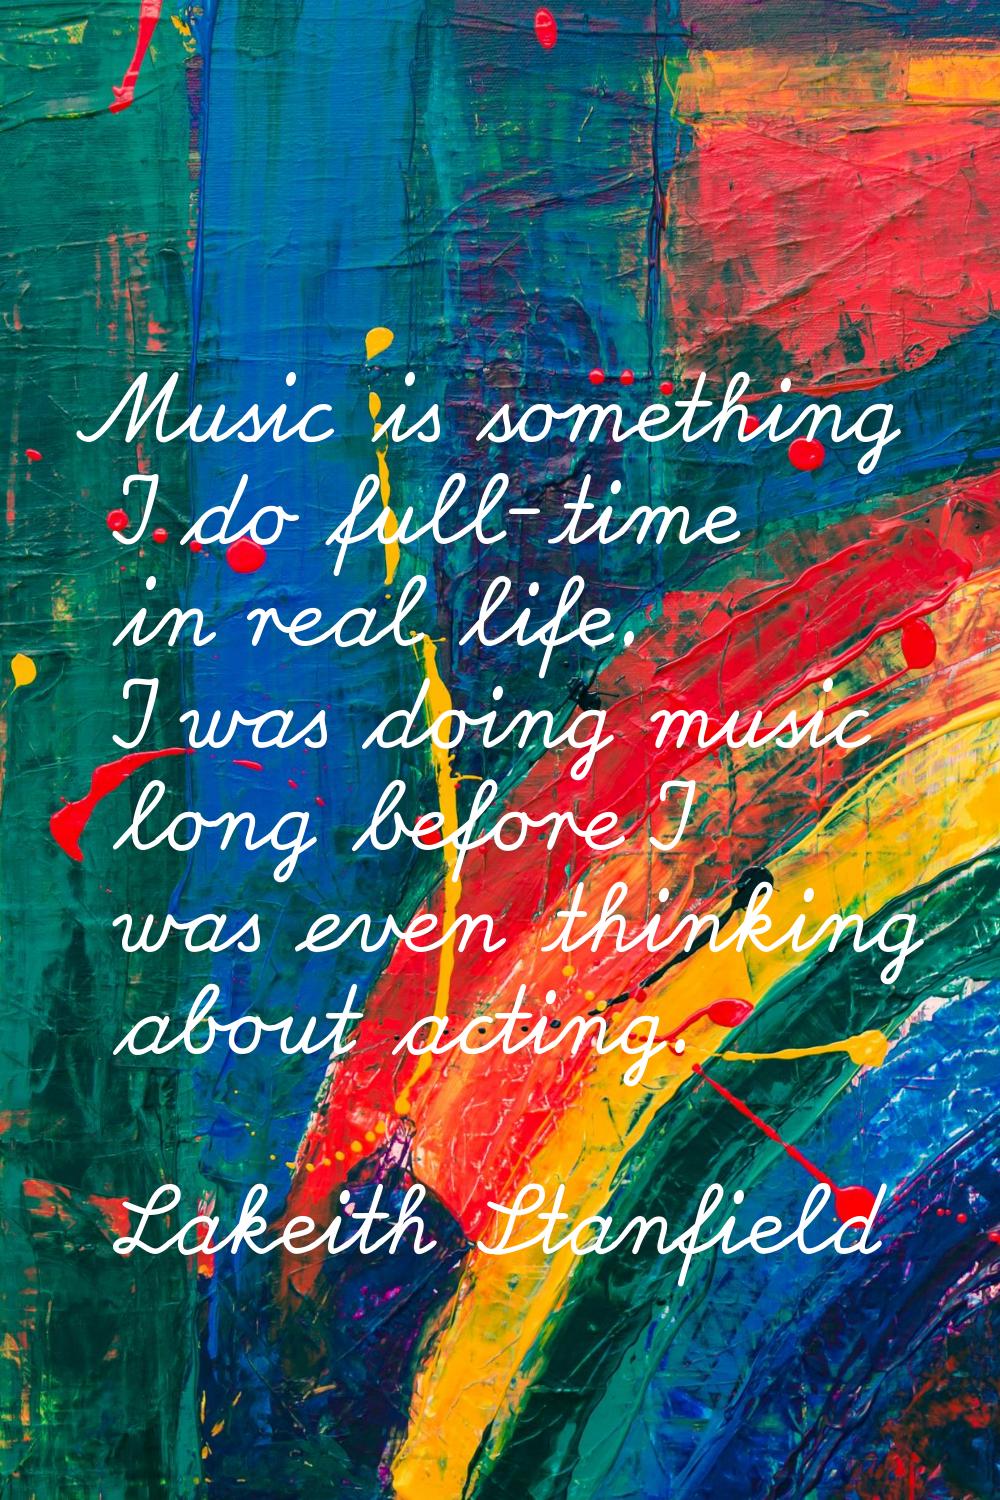 Music is something I do full-time in real life. I was doing music long before I was even thinking a